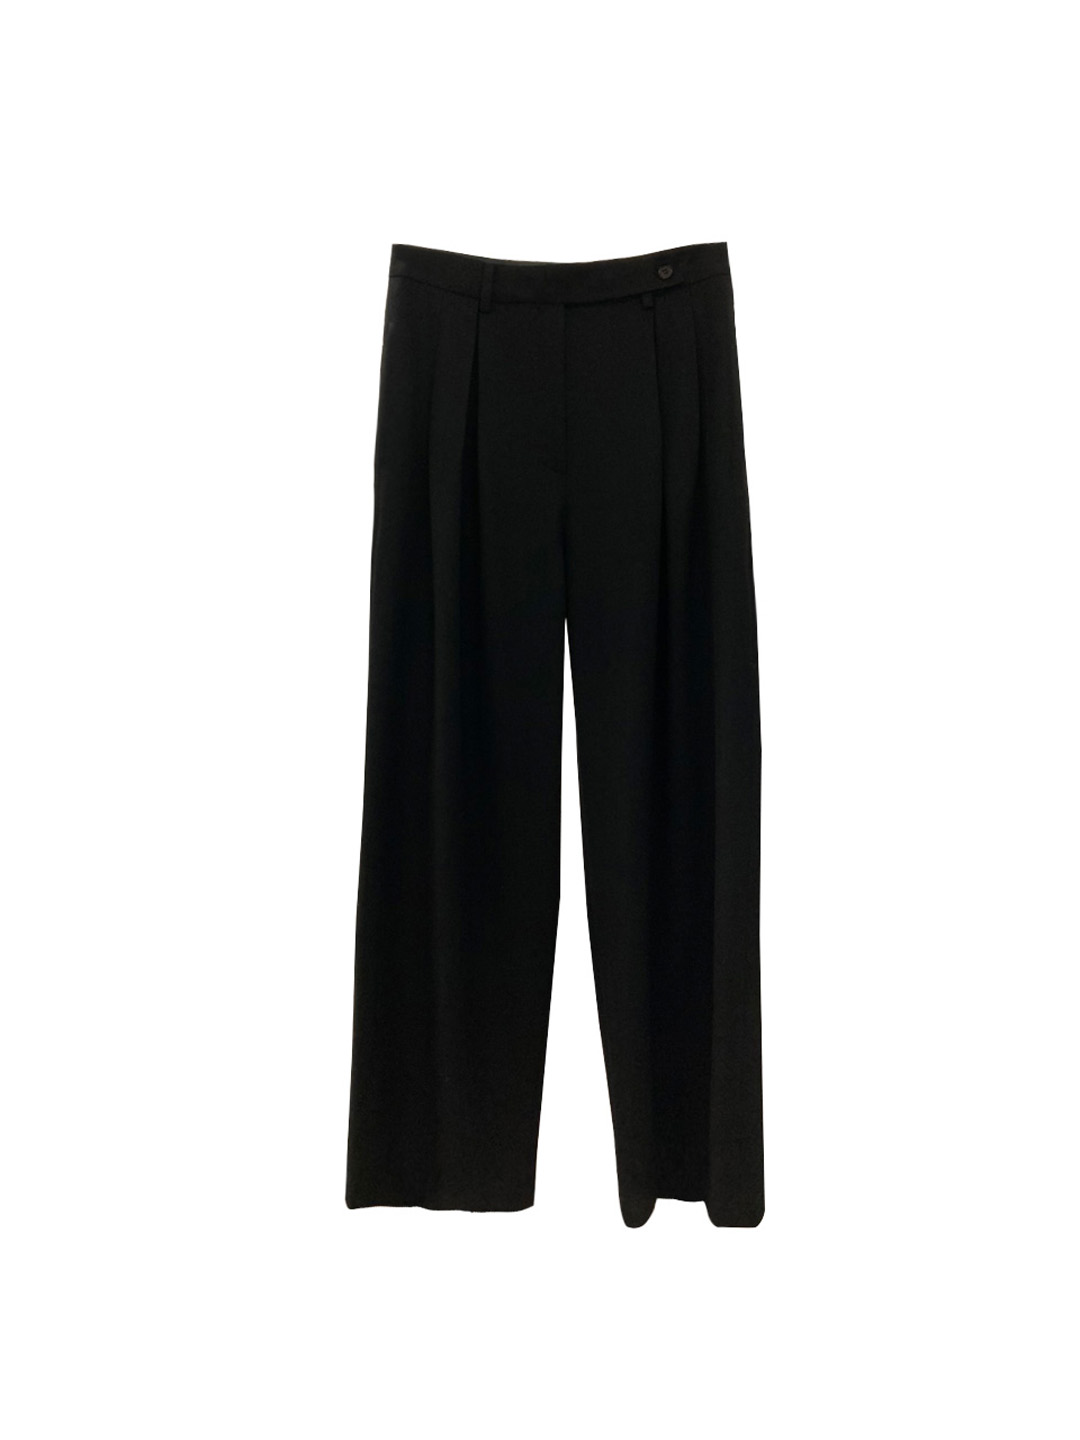 Wide Fit Tailored Pants / 와이드 핏 테일러드 팬츠